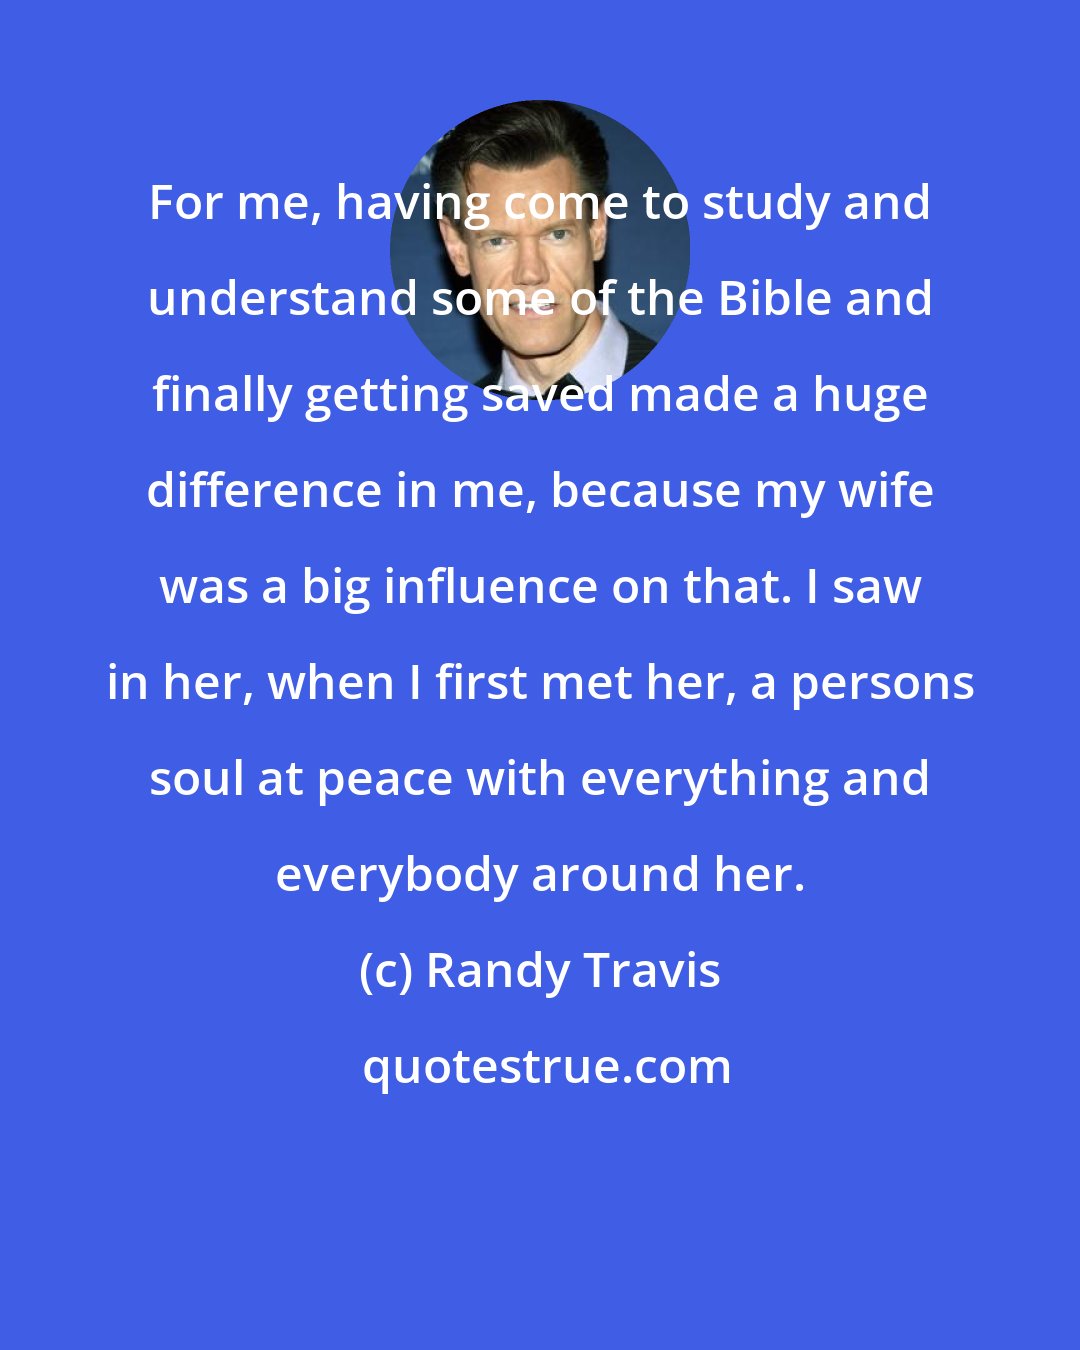 Randy Travis: For me, having come to study and understand some of the Bible and finally getting saved made a huge difference in me, because my wife was a big influence on that. I saw in her, when I first met her, a persons soul at peace with everything and everybody around her.